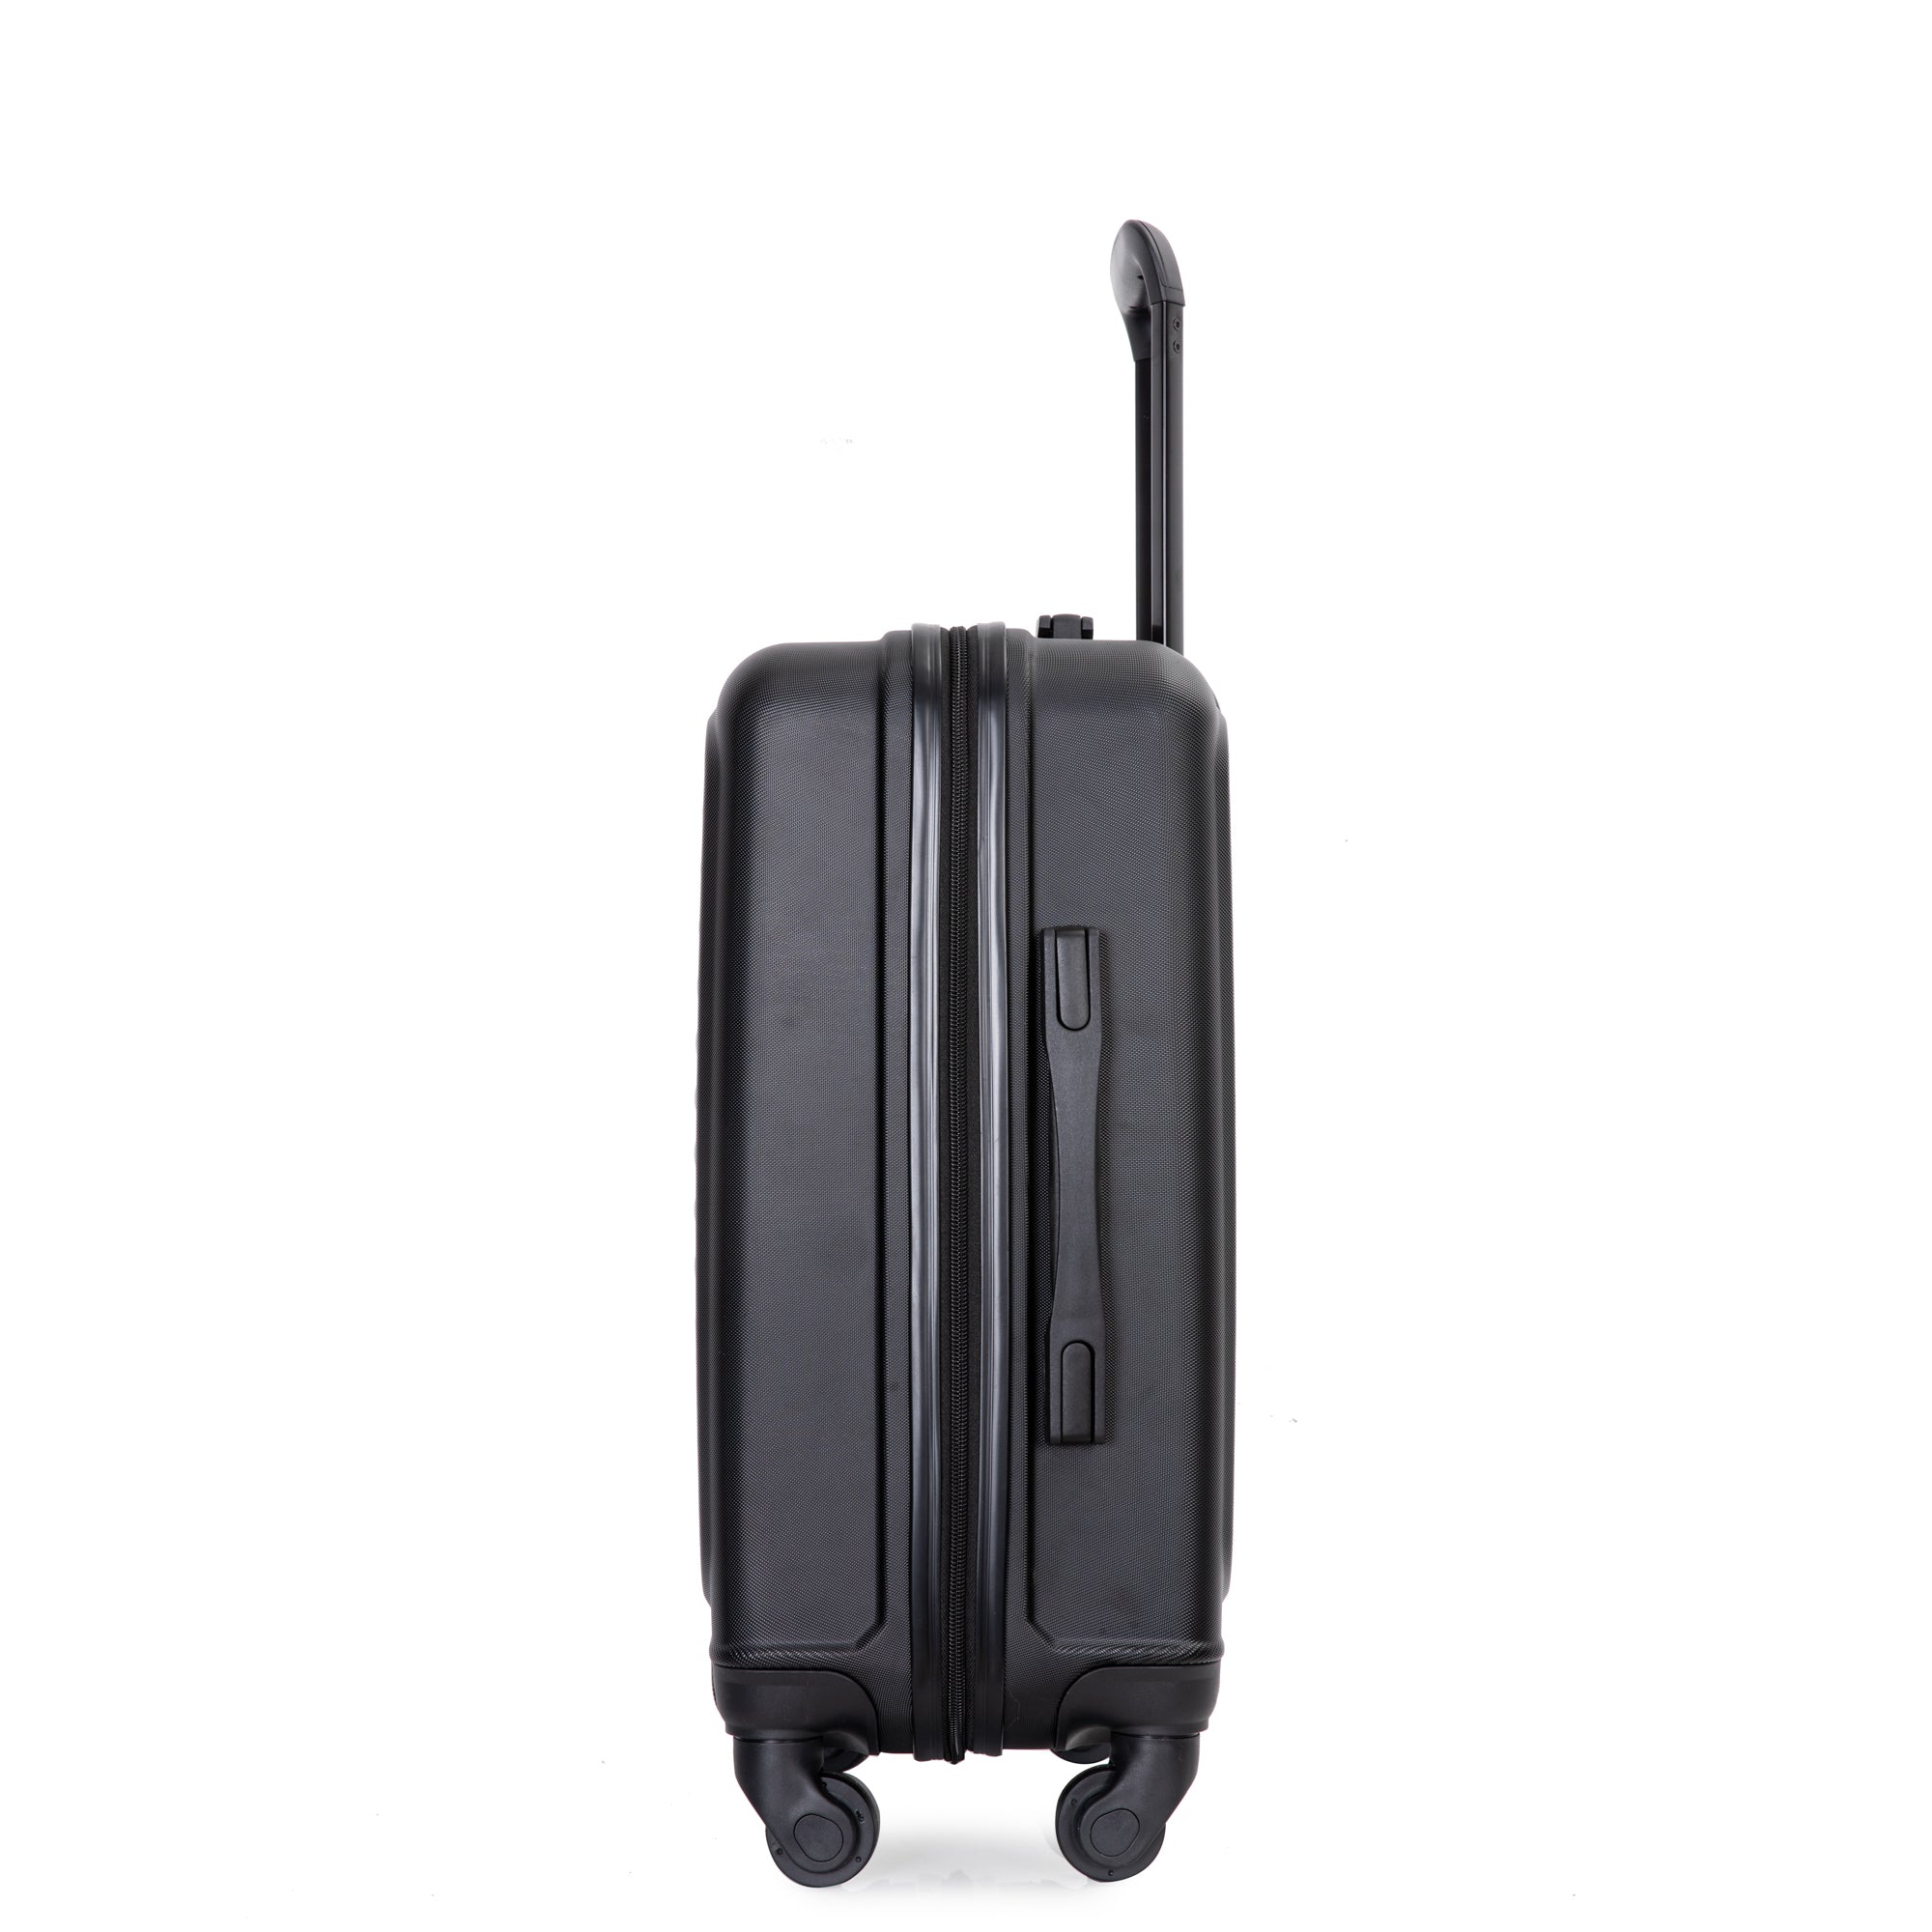 20" Carry on Luggage Lightweight Suitcase, Spinner black-abs